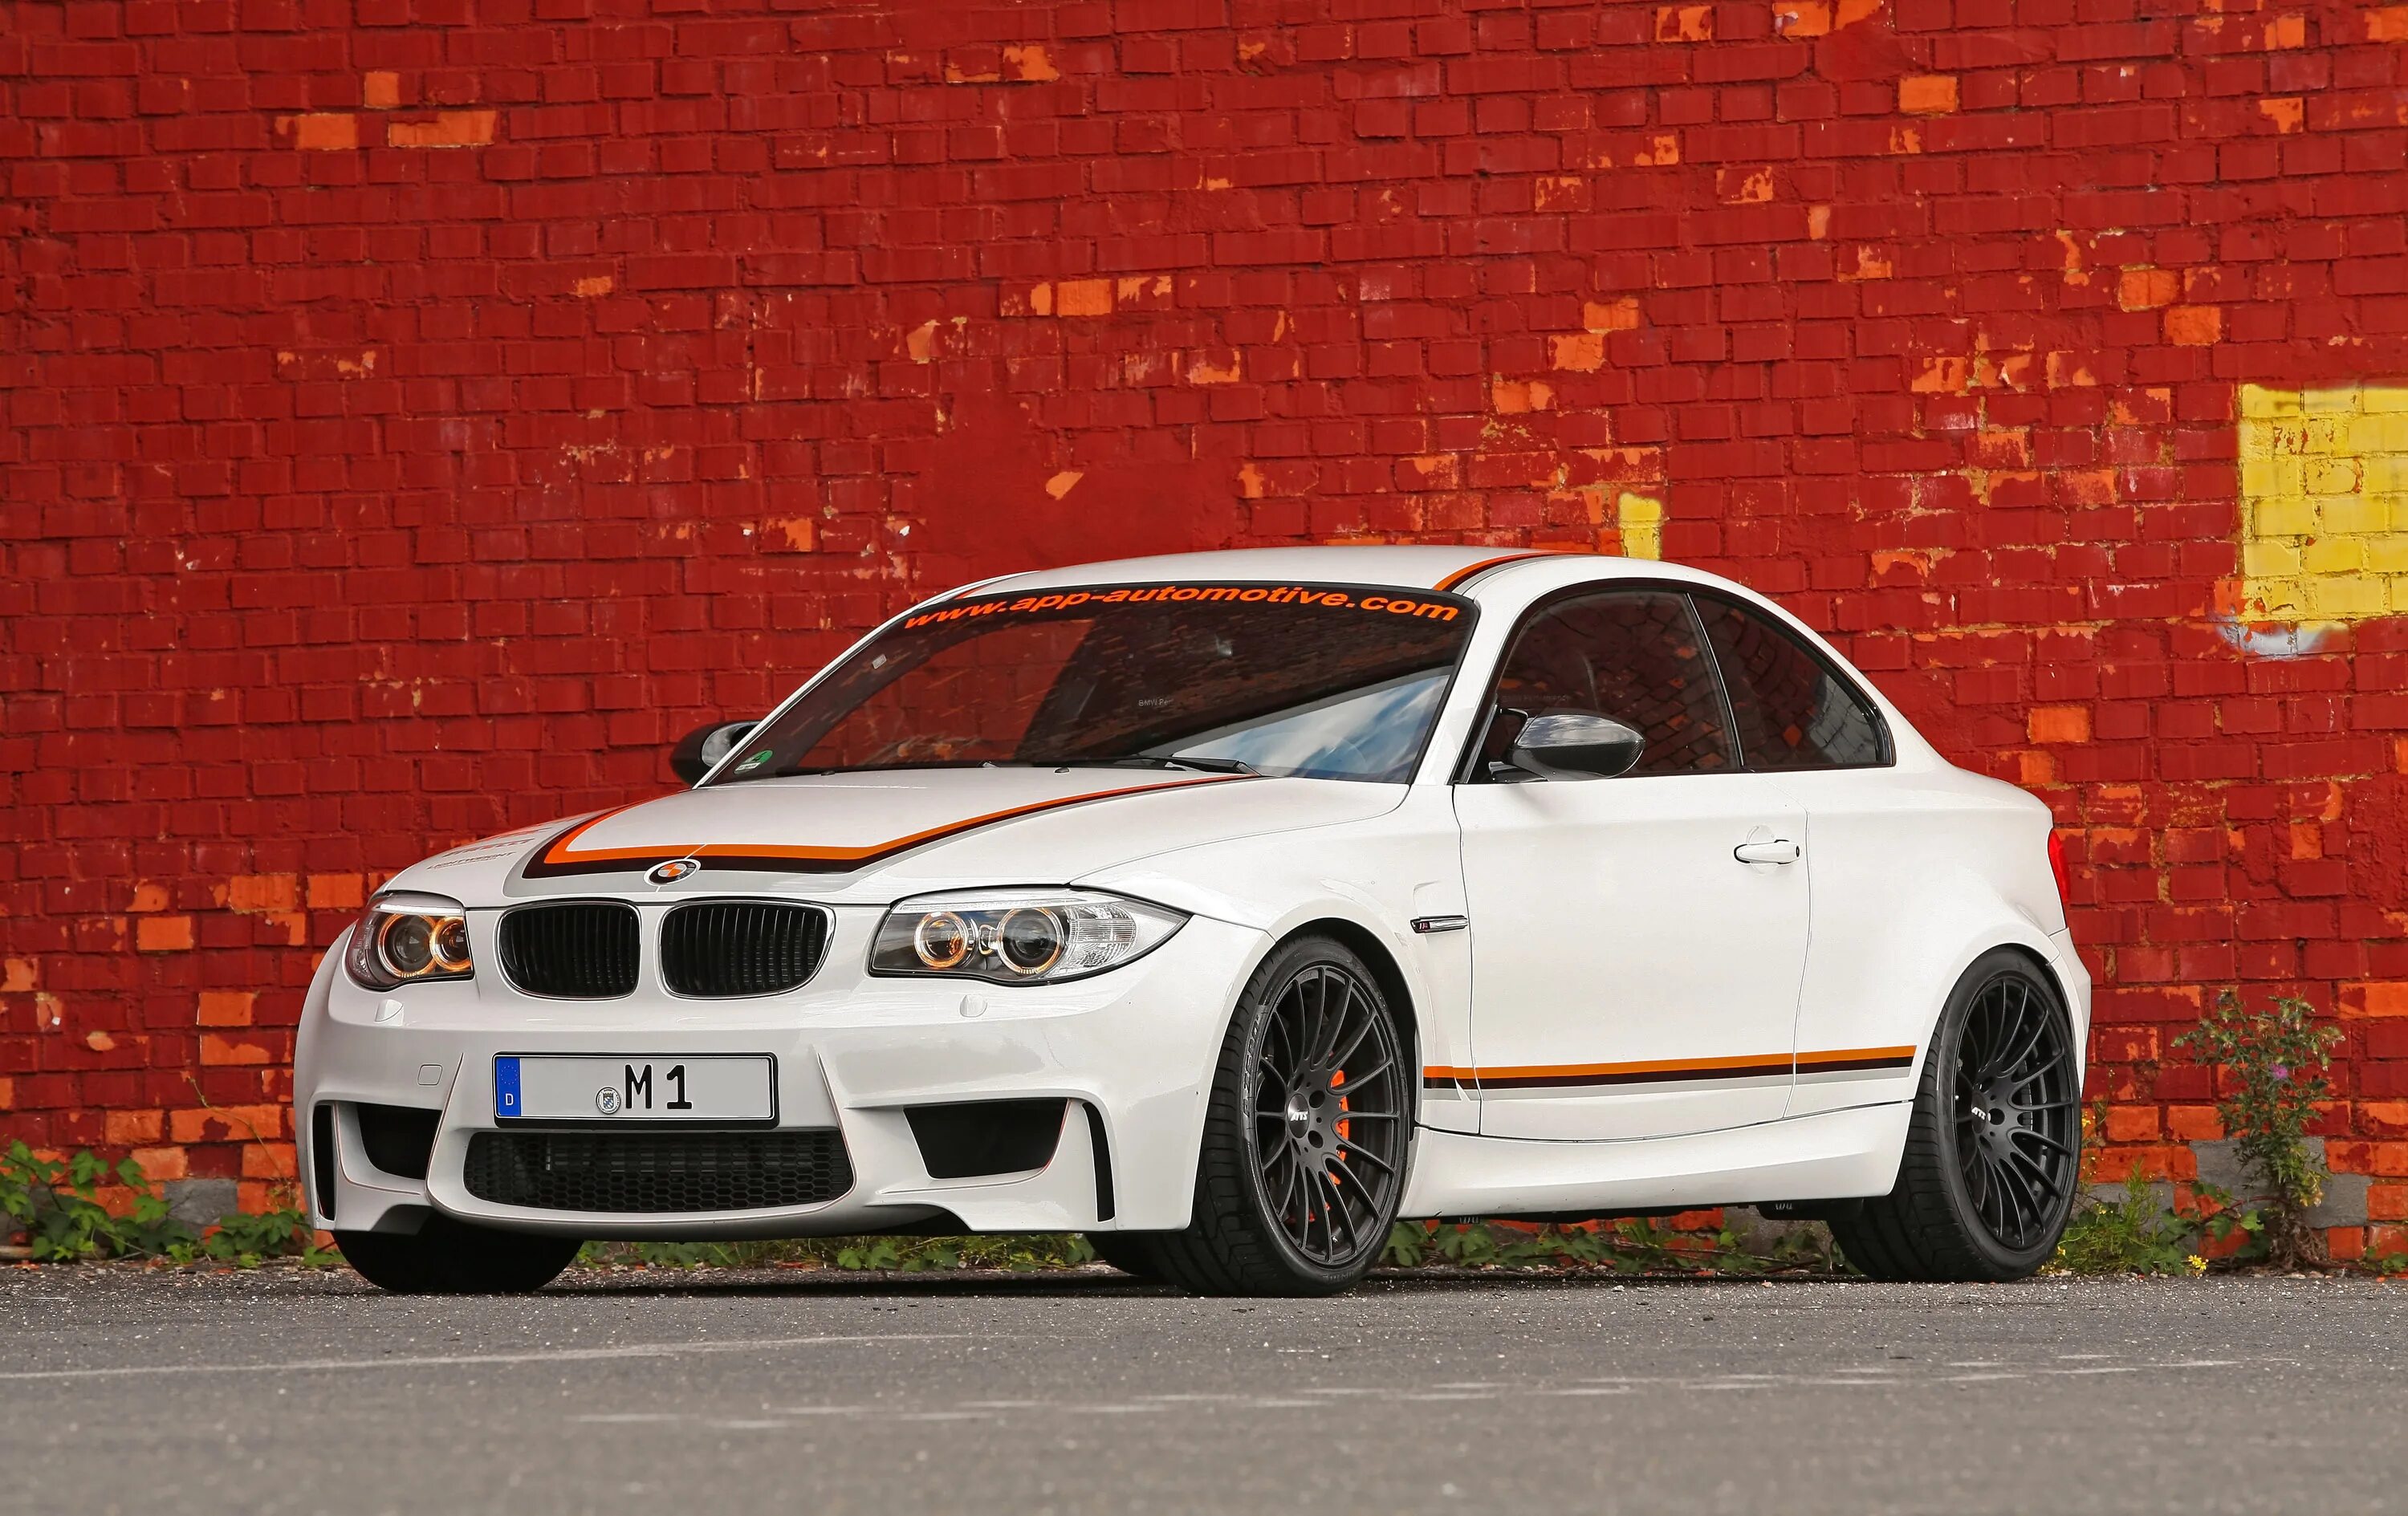 Bmw m coupe. BMW 1m Coupe. BMW 1m Coupe e82. BMW 1 Series m Coupe. BMW m1 Coupe 2011.